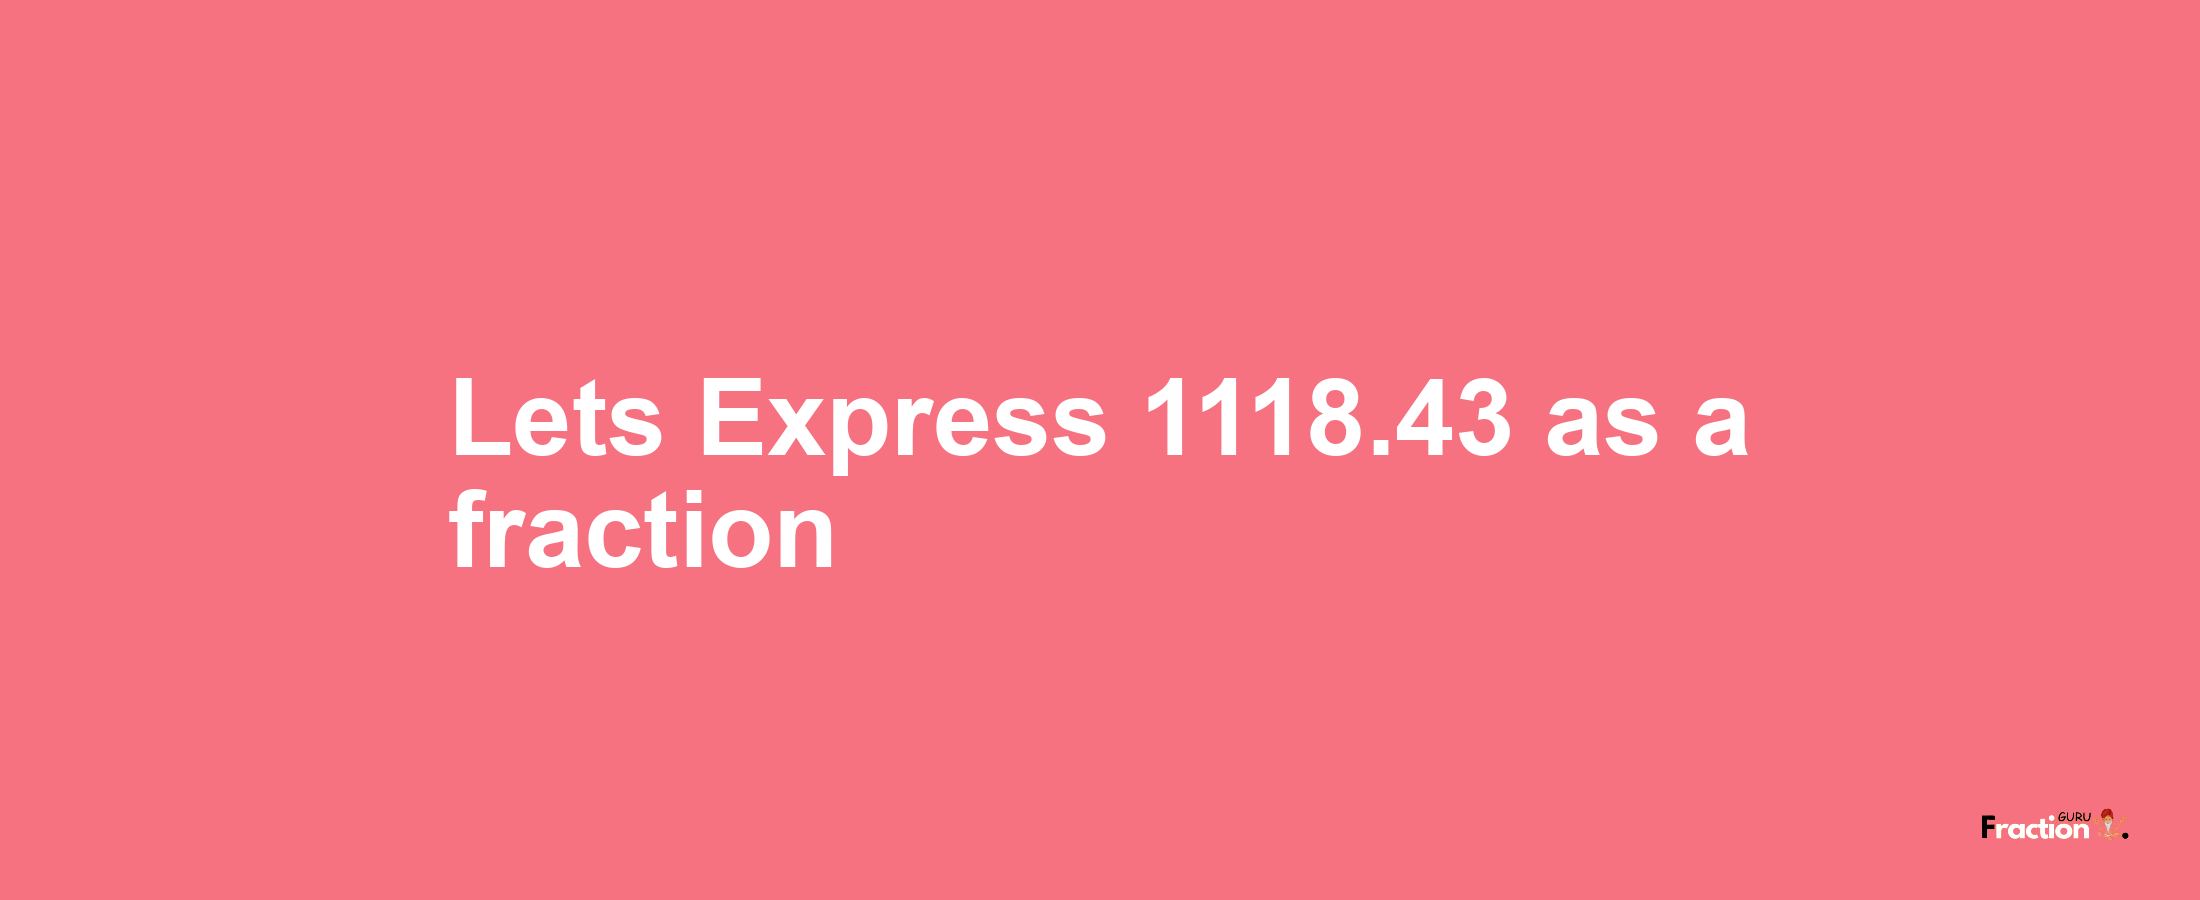 Lets Express 1118.43 as afraction